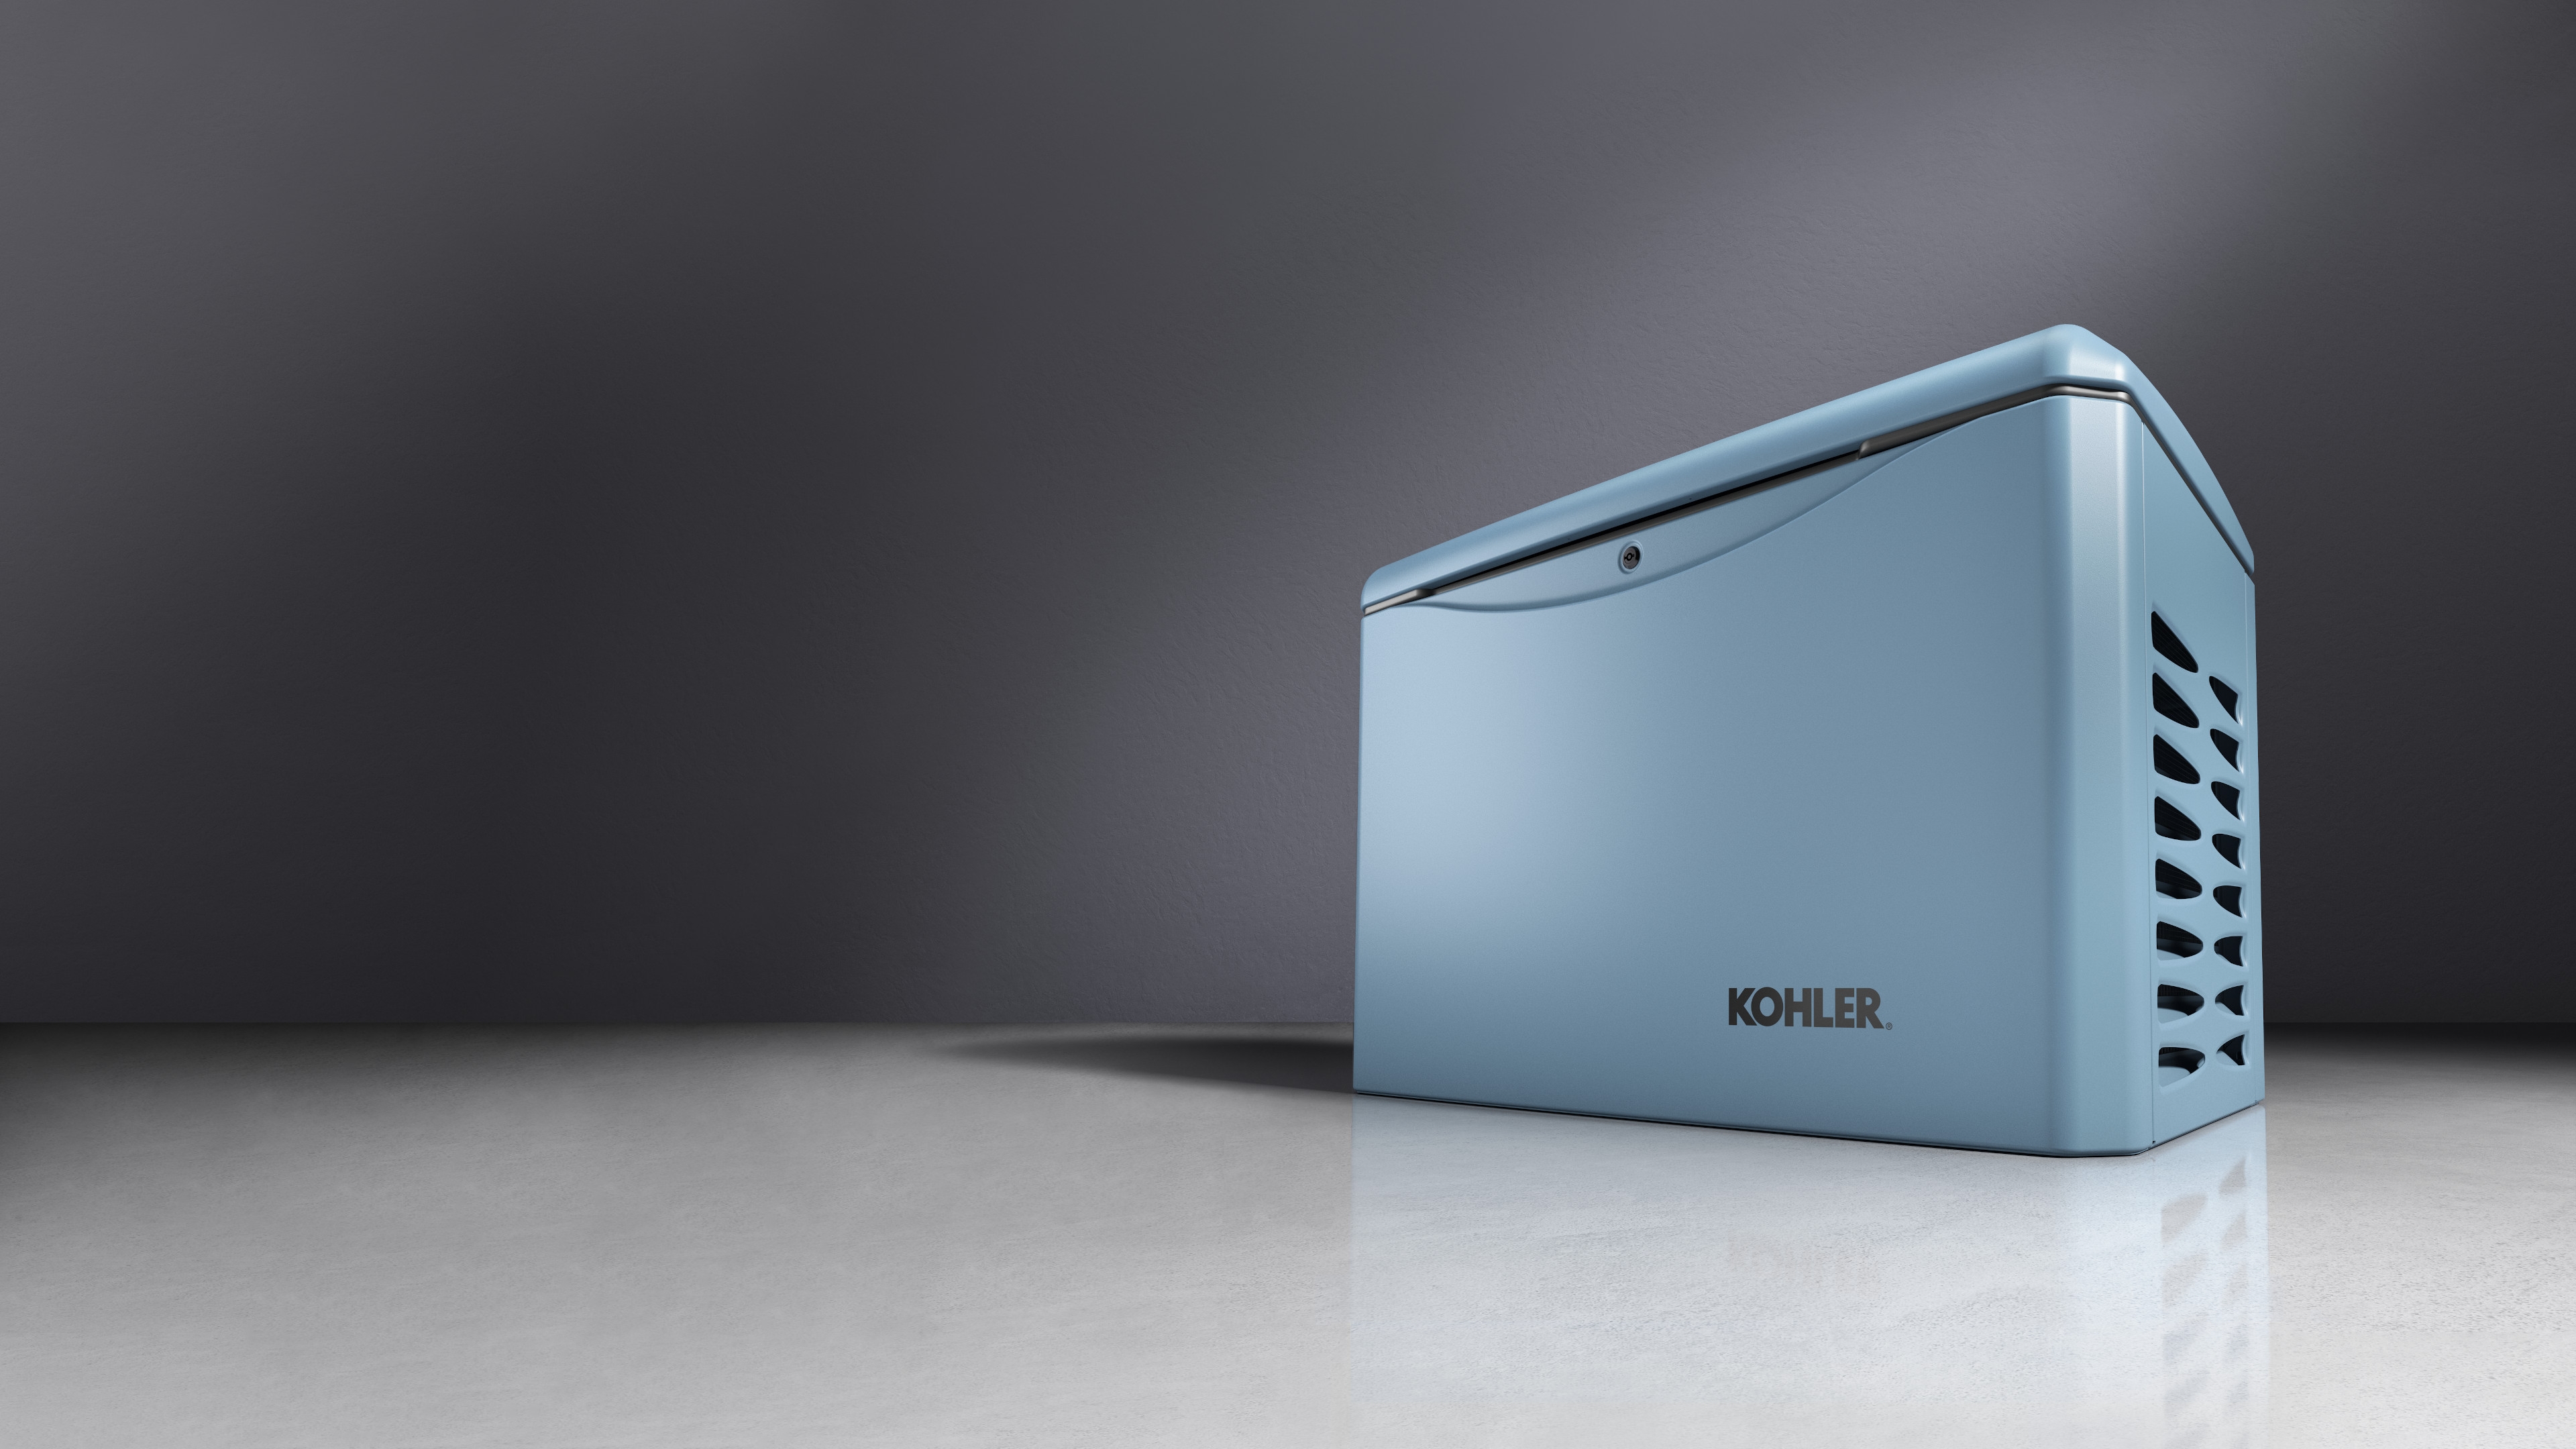 Canyon Blue color Kohler residential generator with ventilated side panels, showcased against a gradient gray background